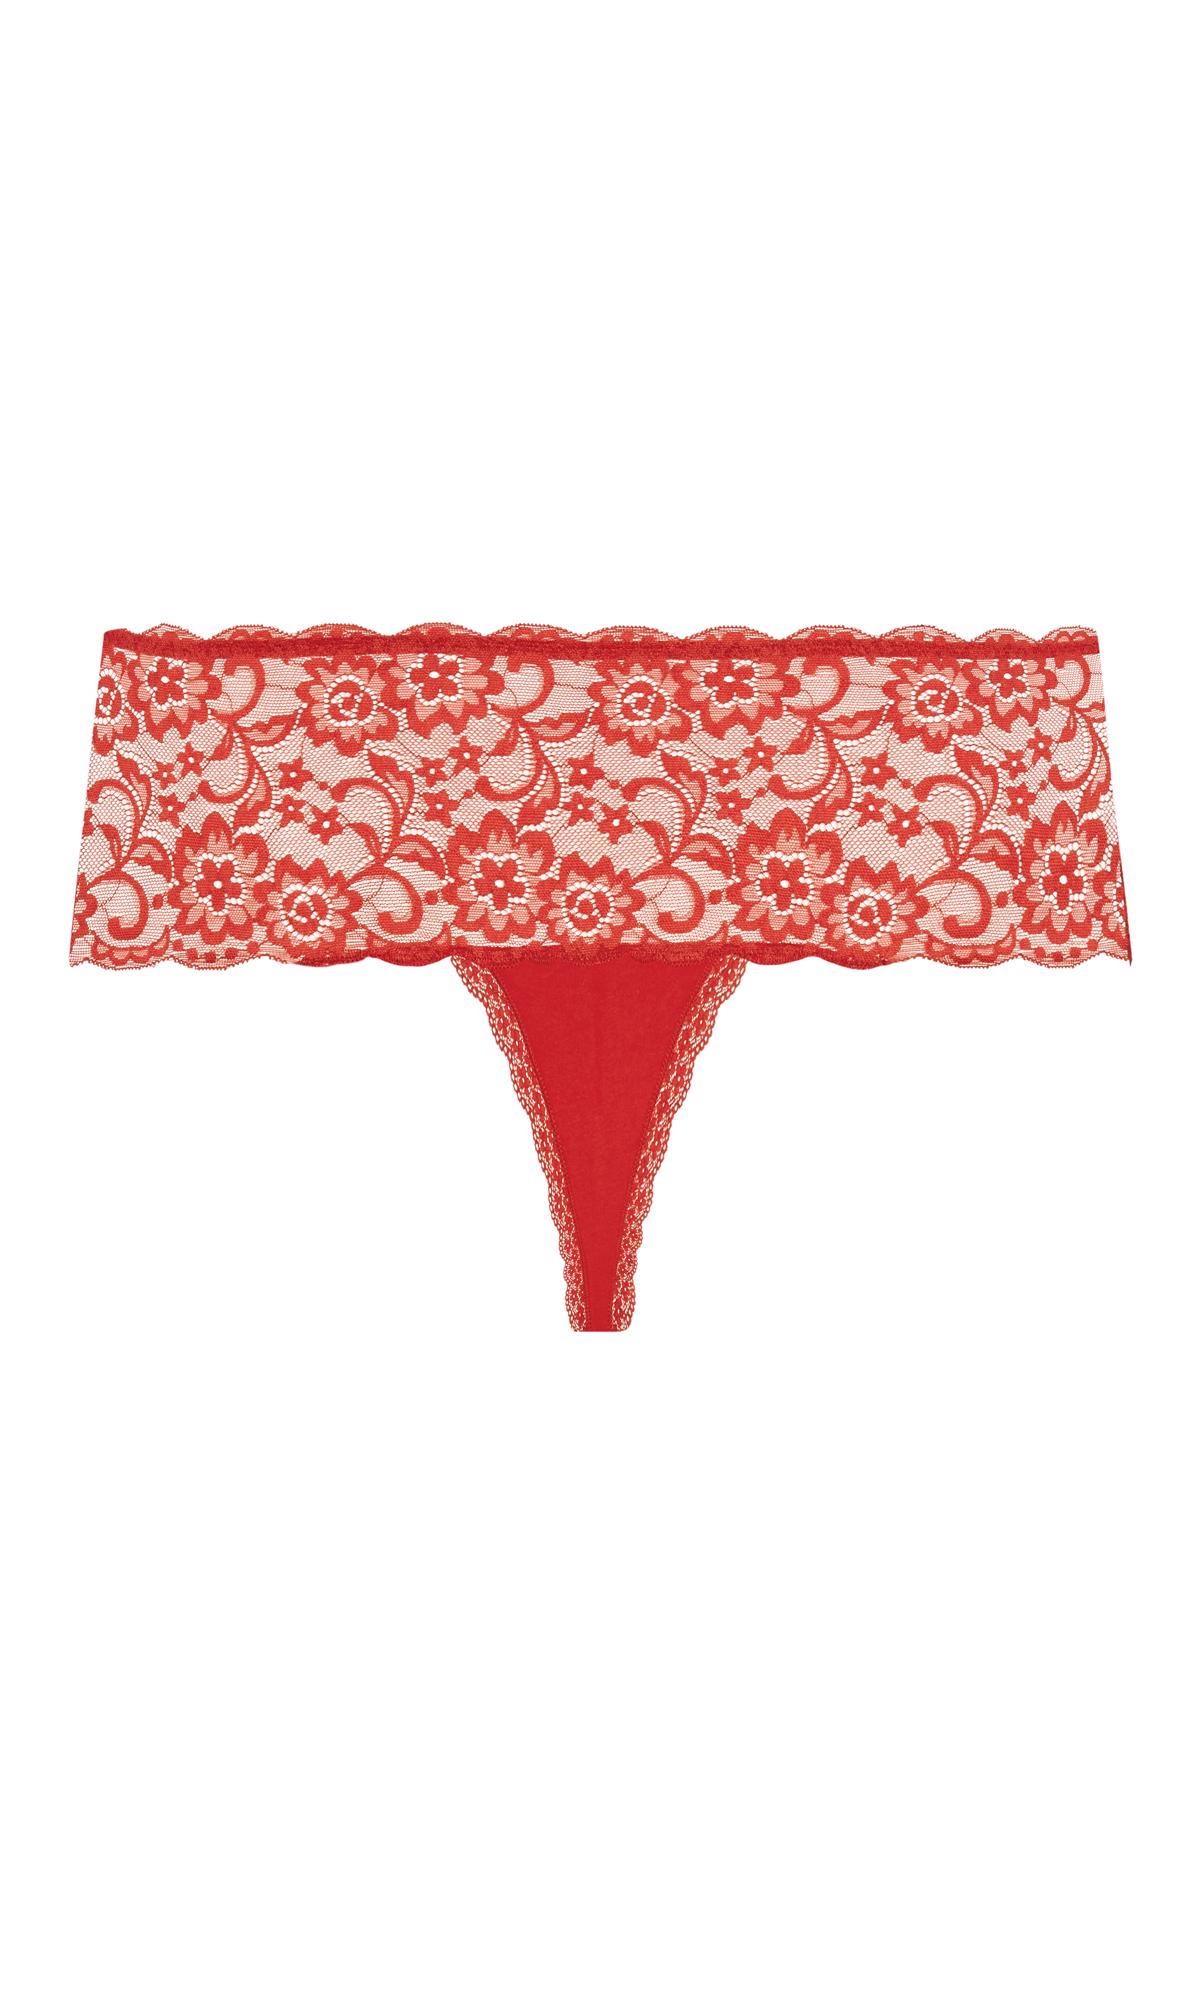 Hips & Curves Red Cotton Thong 3